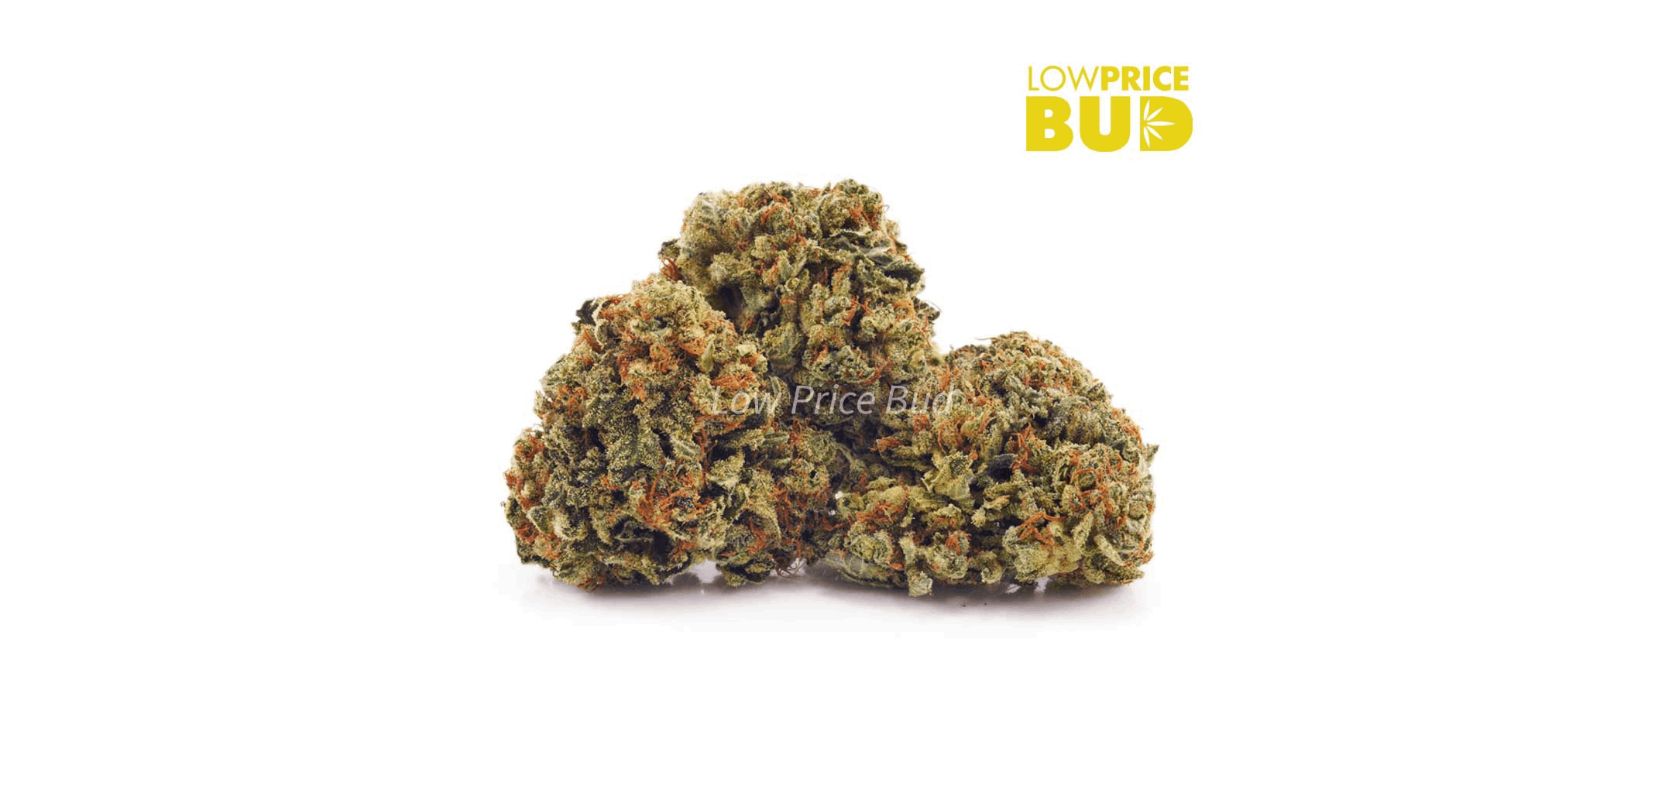 As a Sativa hybrid with around 18 percent THC, this budget bud is a great alternative to the potent Blue Coma strain. 